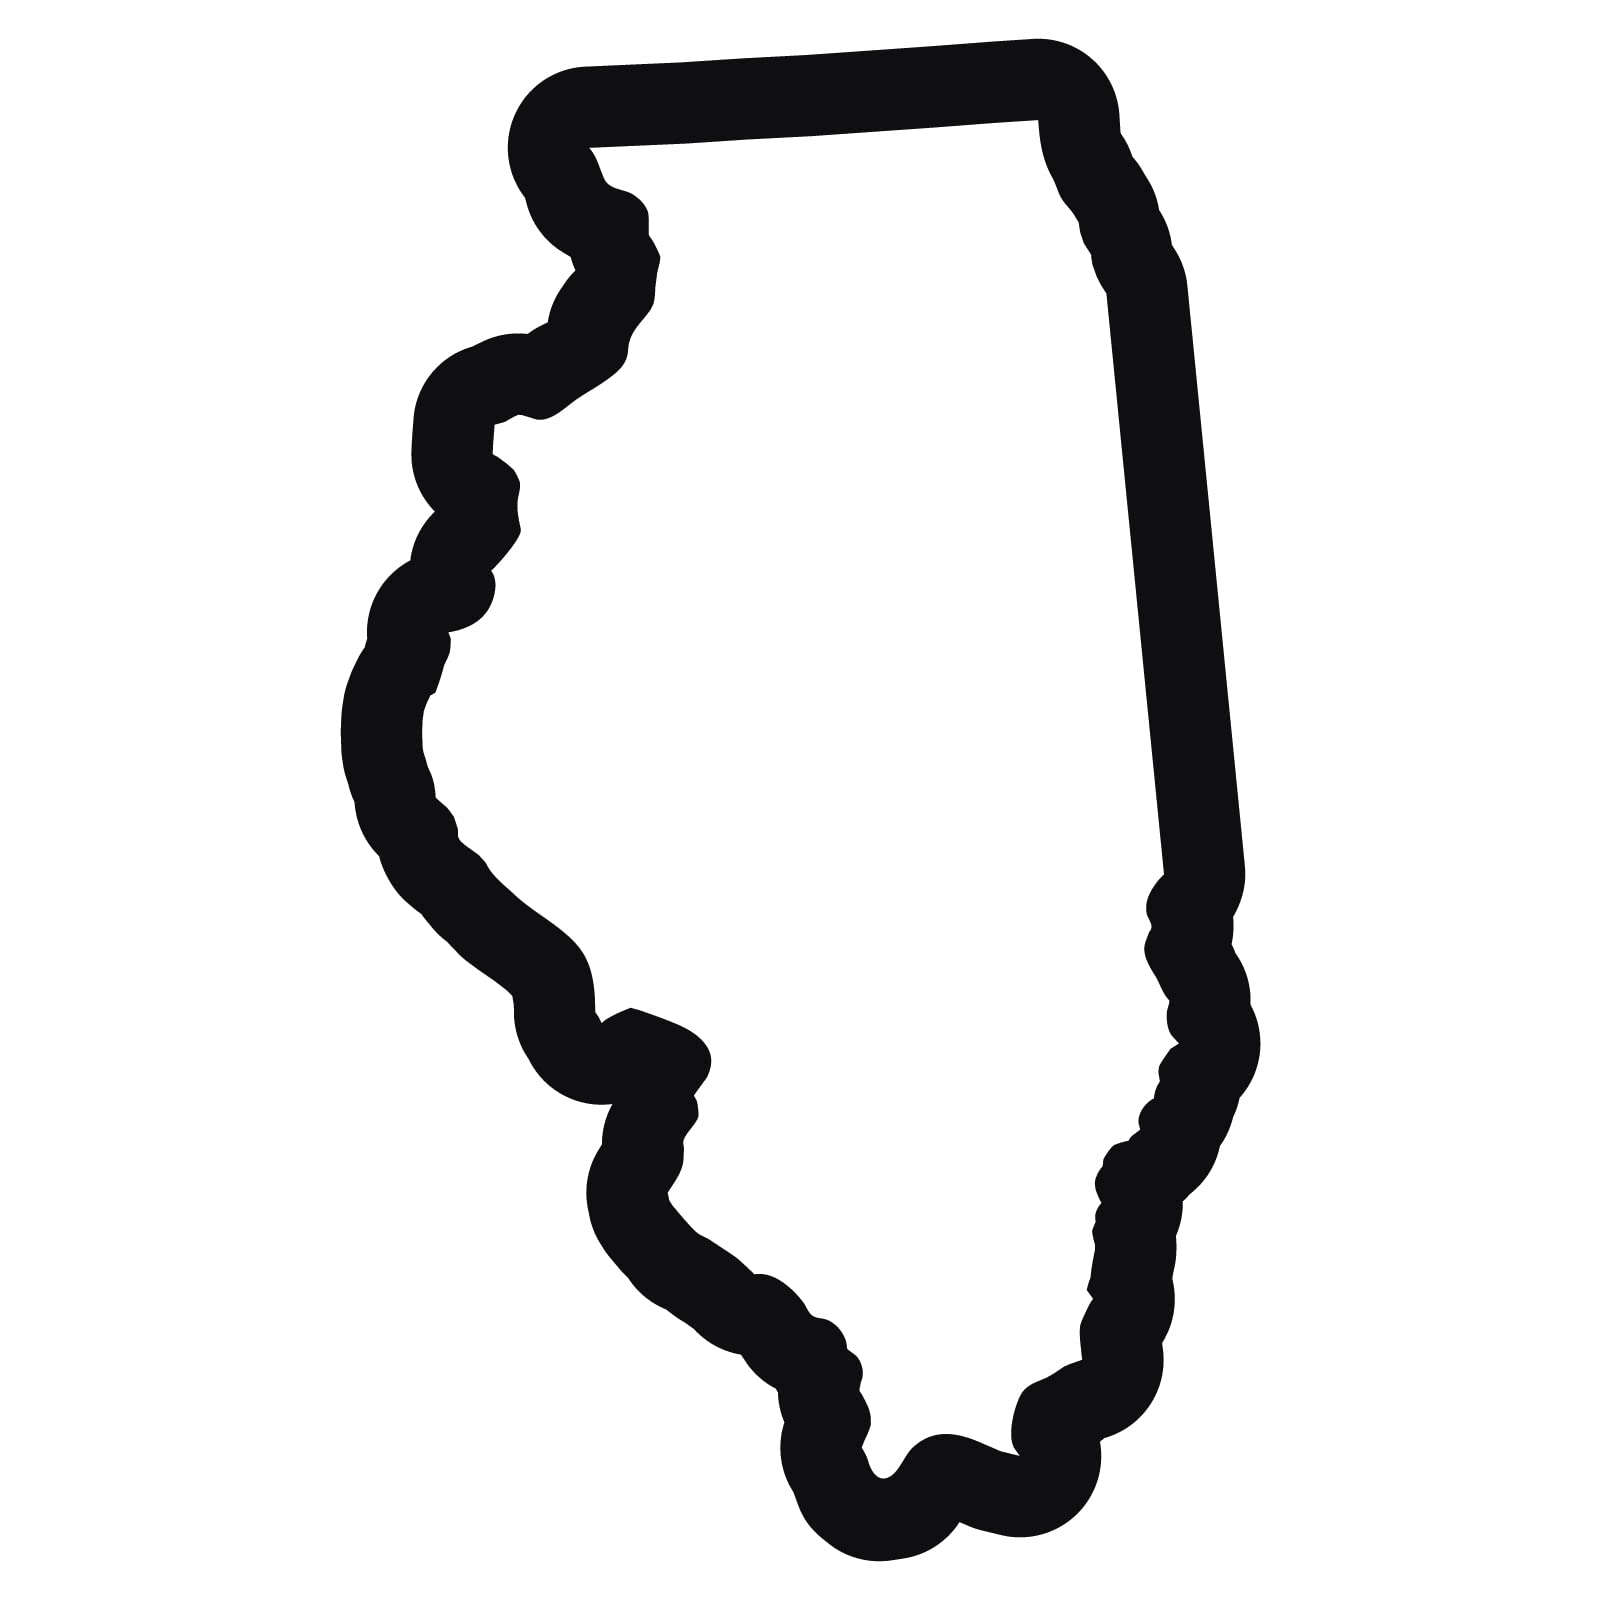 Illinois state outline map with FAQ bubbles